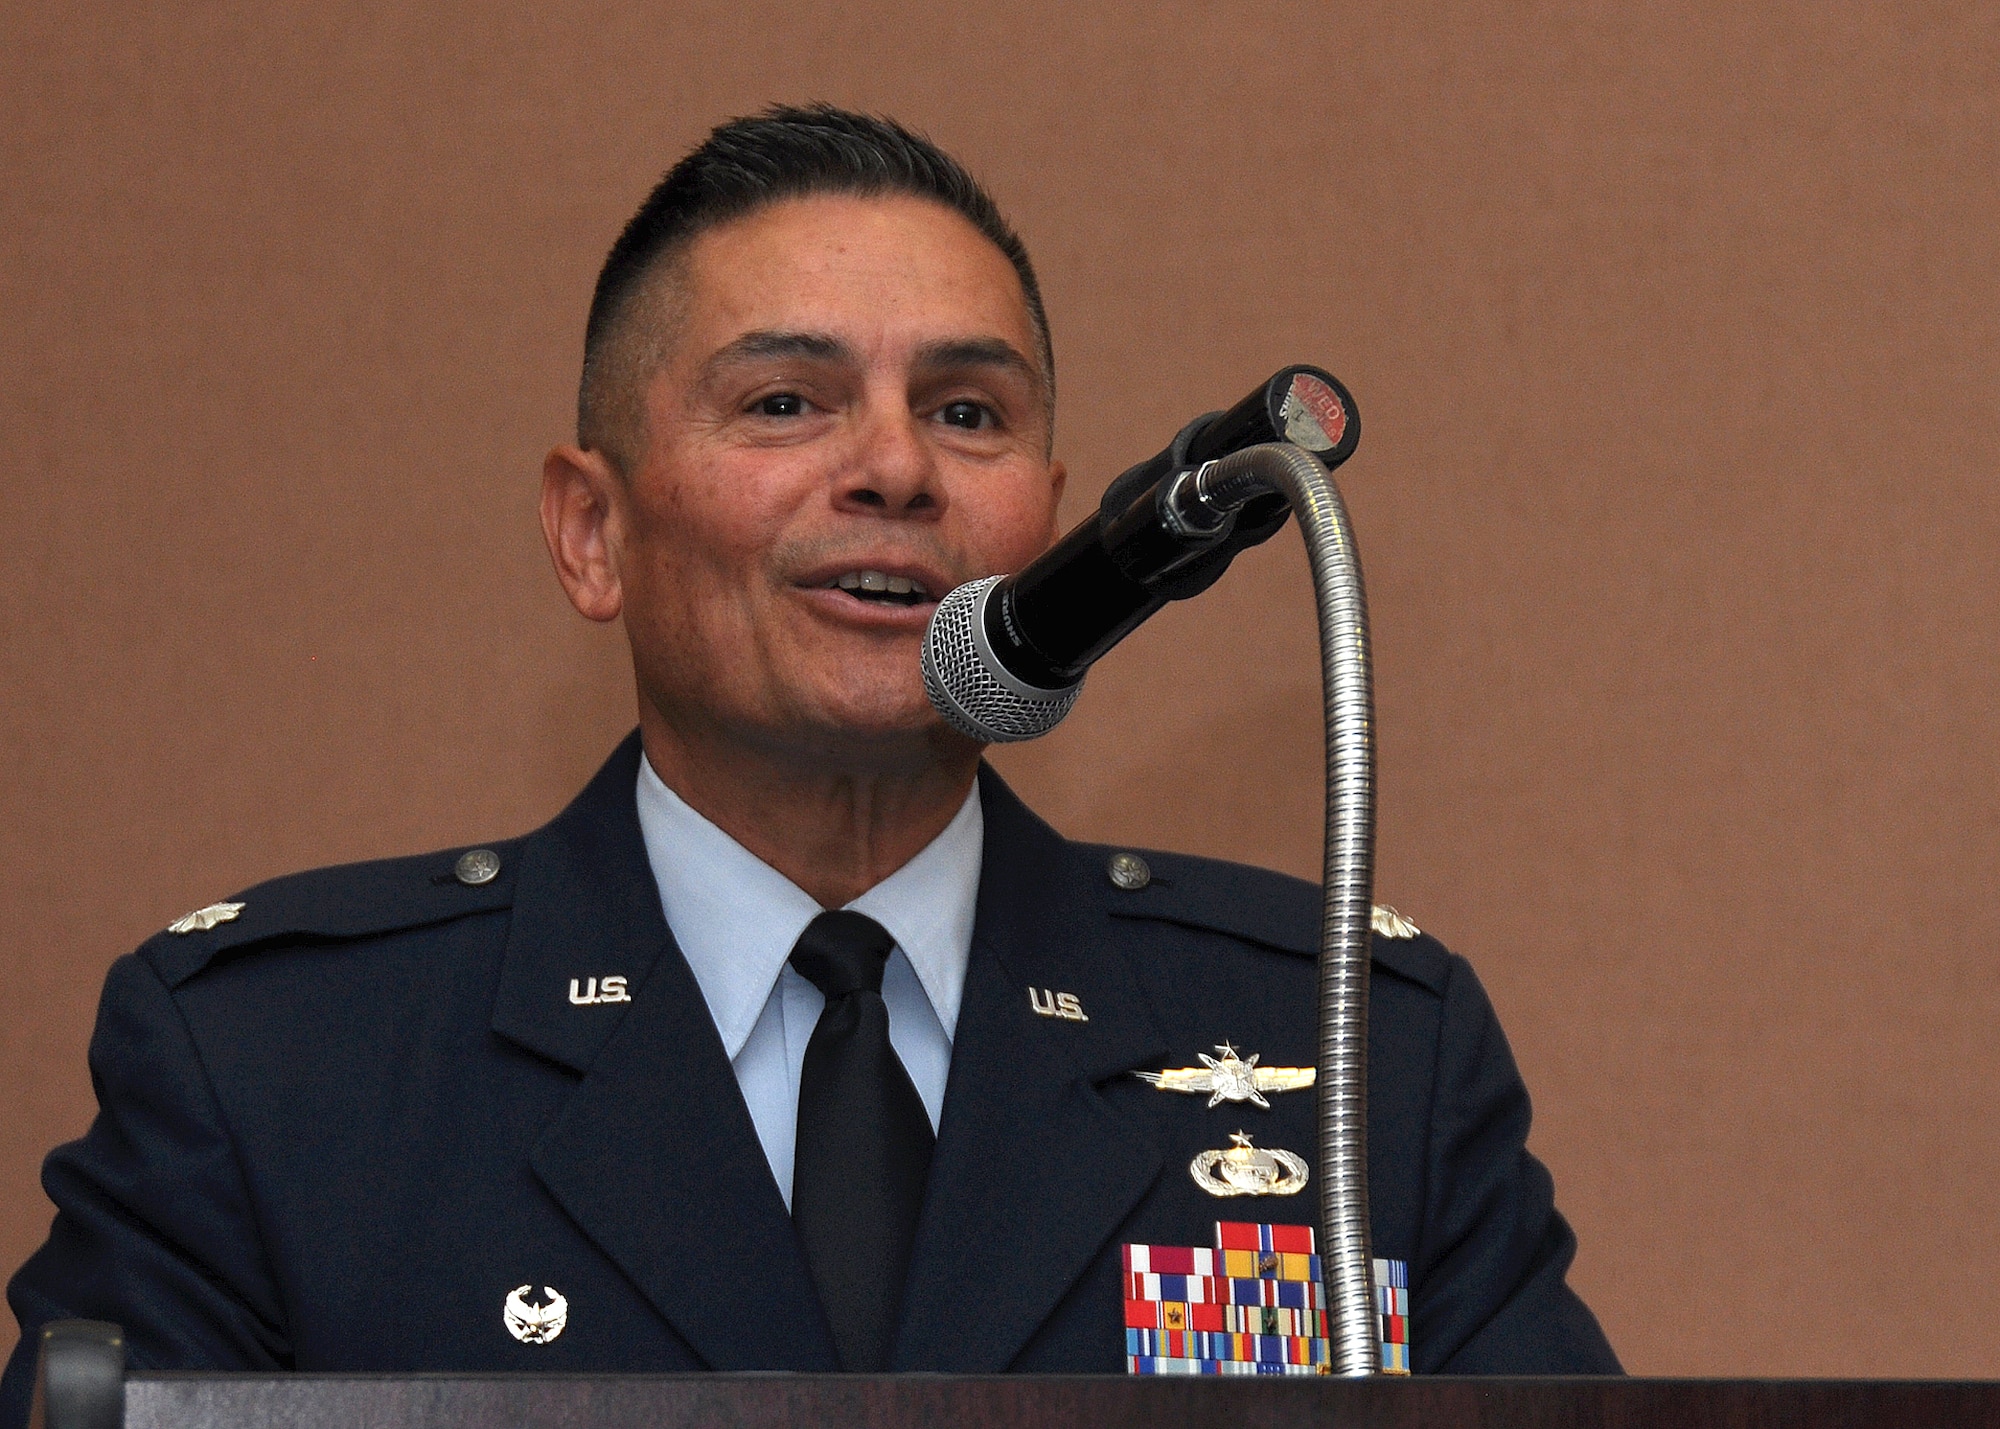 Lt. Col. Robert Garcia assumes command as the 38th Intelligence Squadron’s first commander today, Beale Air Force Base, Calif. The 38th IS provides real time intelligence support to ground forces world-wide. (U.S. Air Force photo by Tech Sgt. Heather Skinkle)